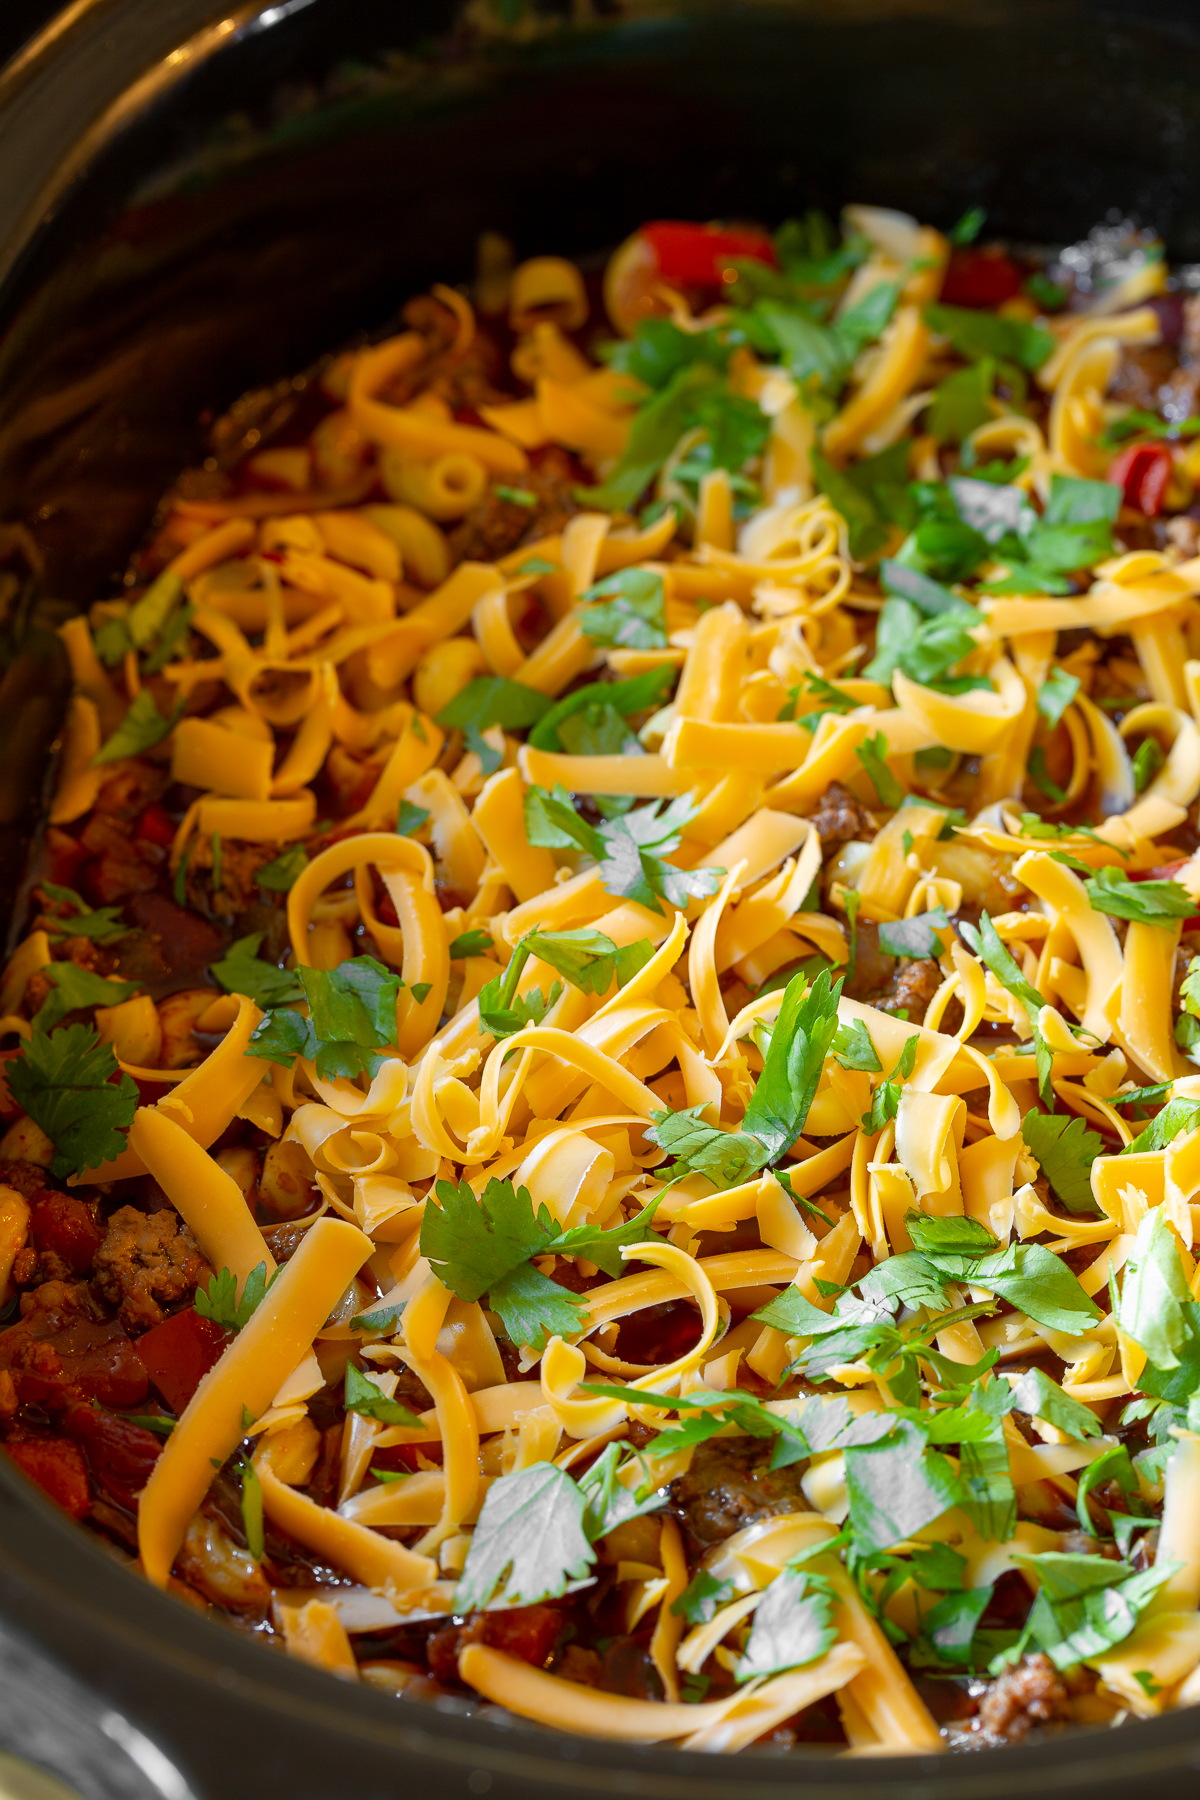 Plenty of shredded cheese and cilantro topping this chili mac
